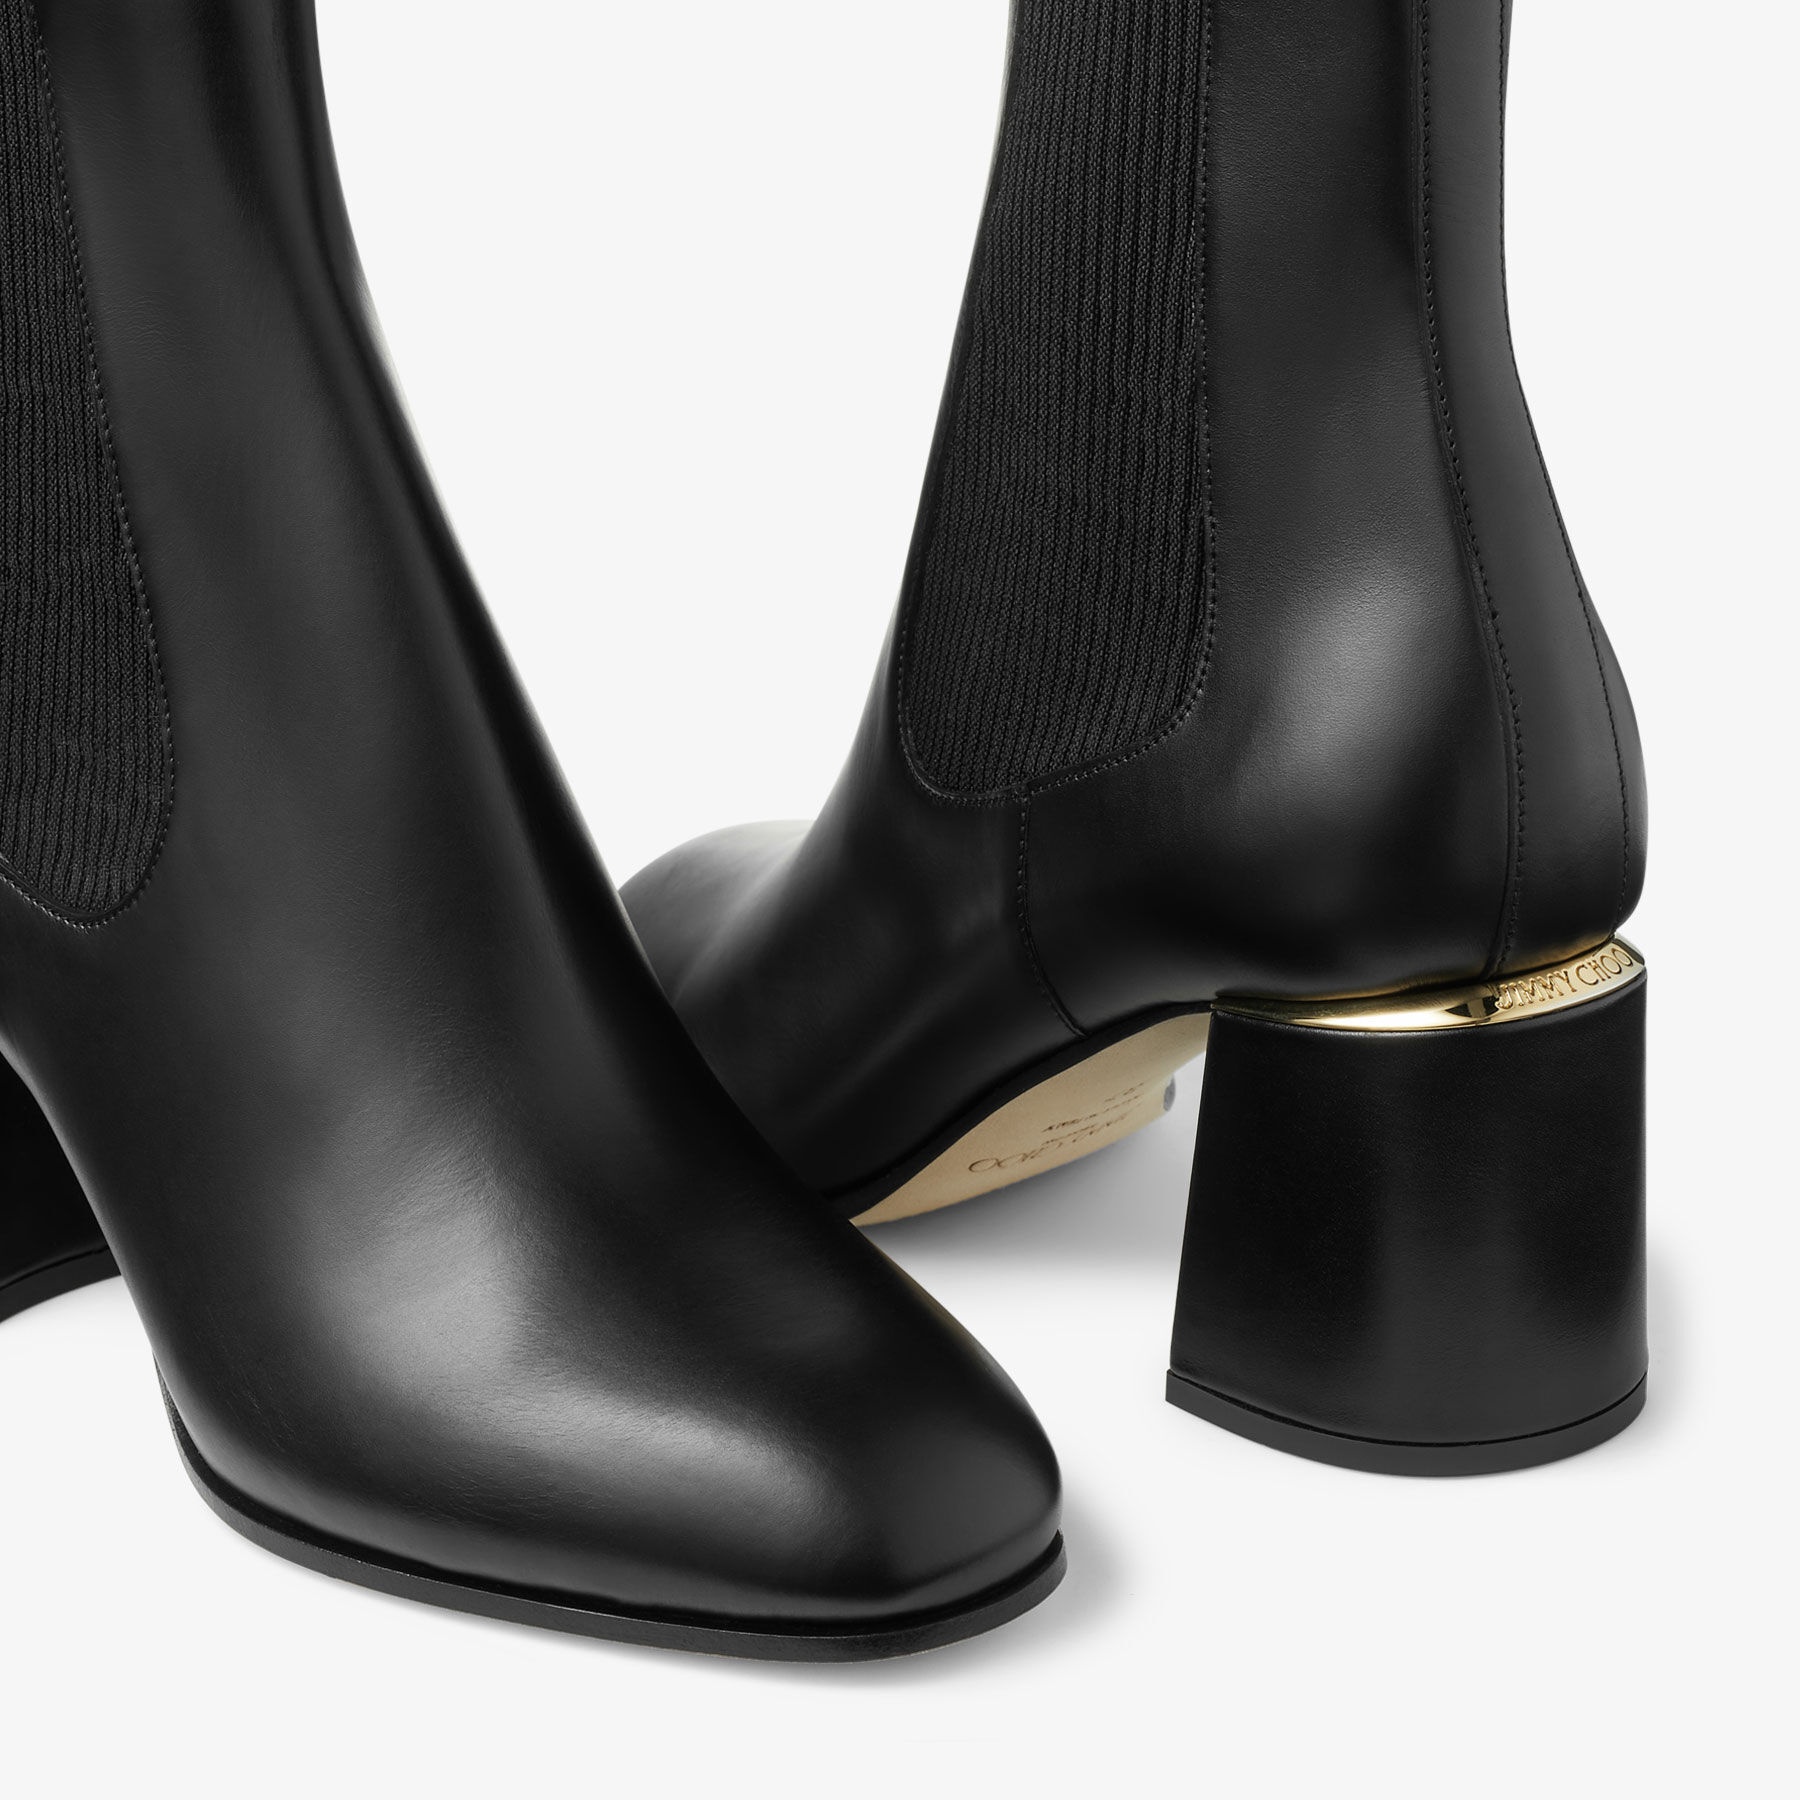 Thessaly 65
Black Leather Ankle Boots - 3